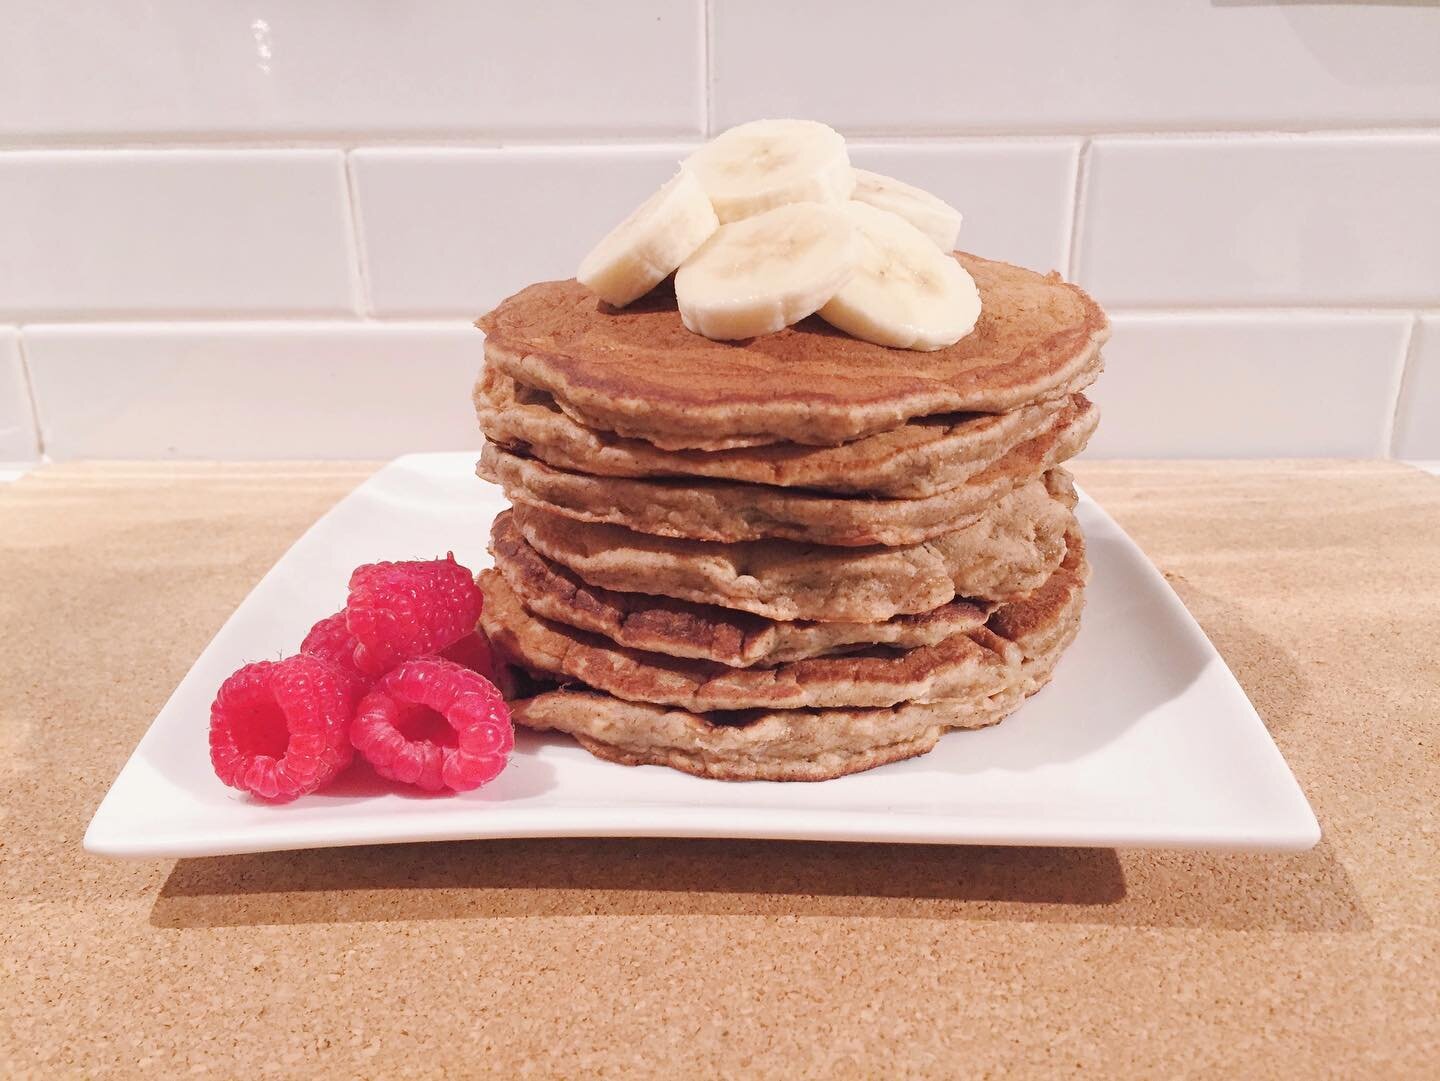 ☆The best oat flour banana pancakes☆ 
Back in my Seattle days my roommate and I would love to *enjoy* a lazy Sunday morning, before grocery shopping, meal prep, laundry, studying and assignments took over the day. I&rsquo;d usually make pancakes and 